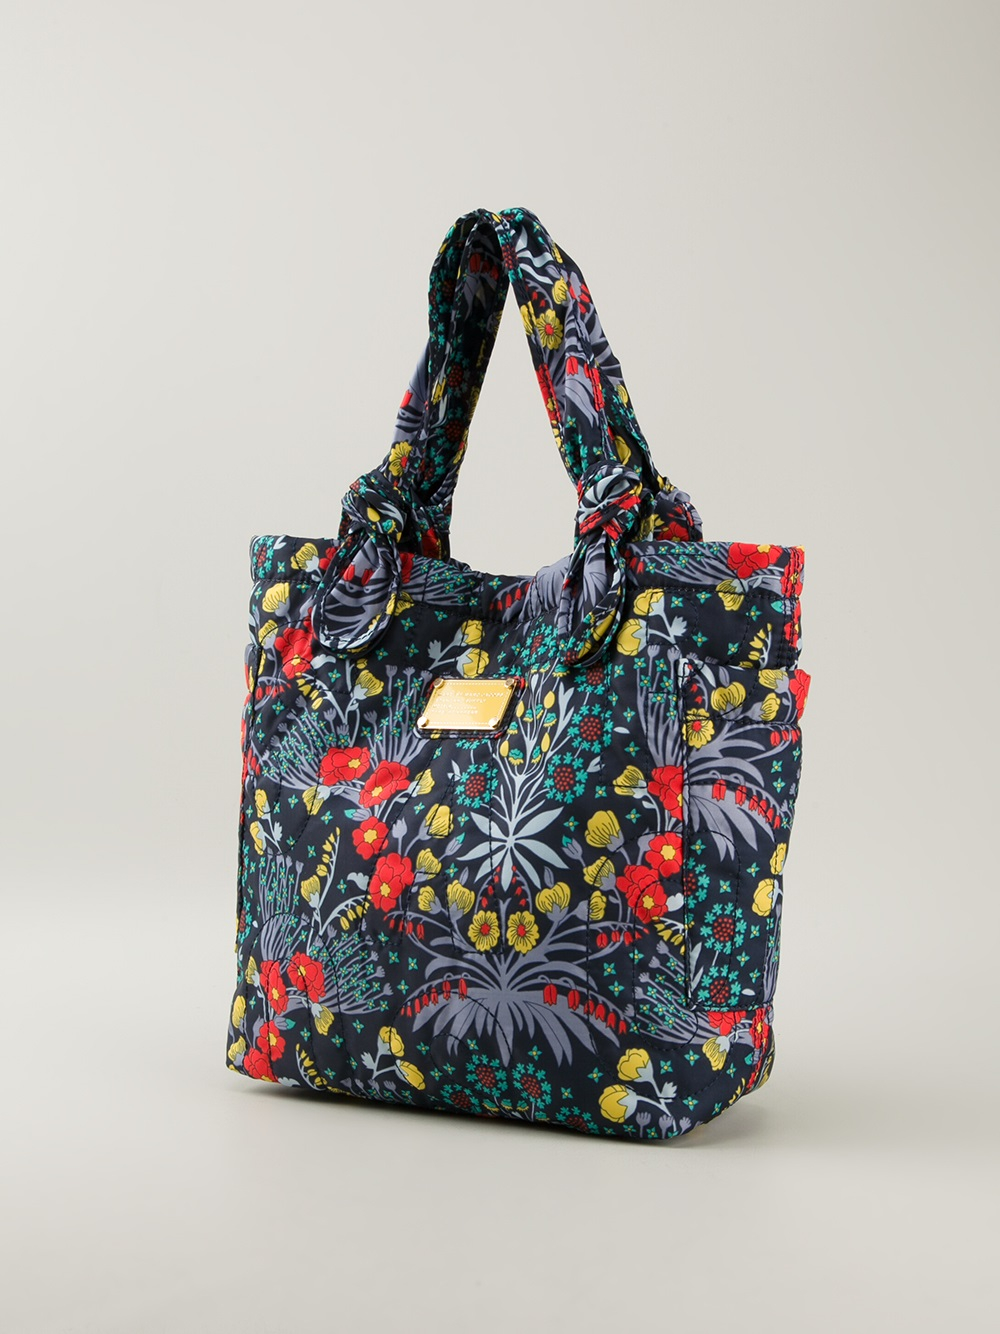 Lyst - Marc By Marc Jacobs Floral Print Shopper Tote in Blue